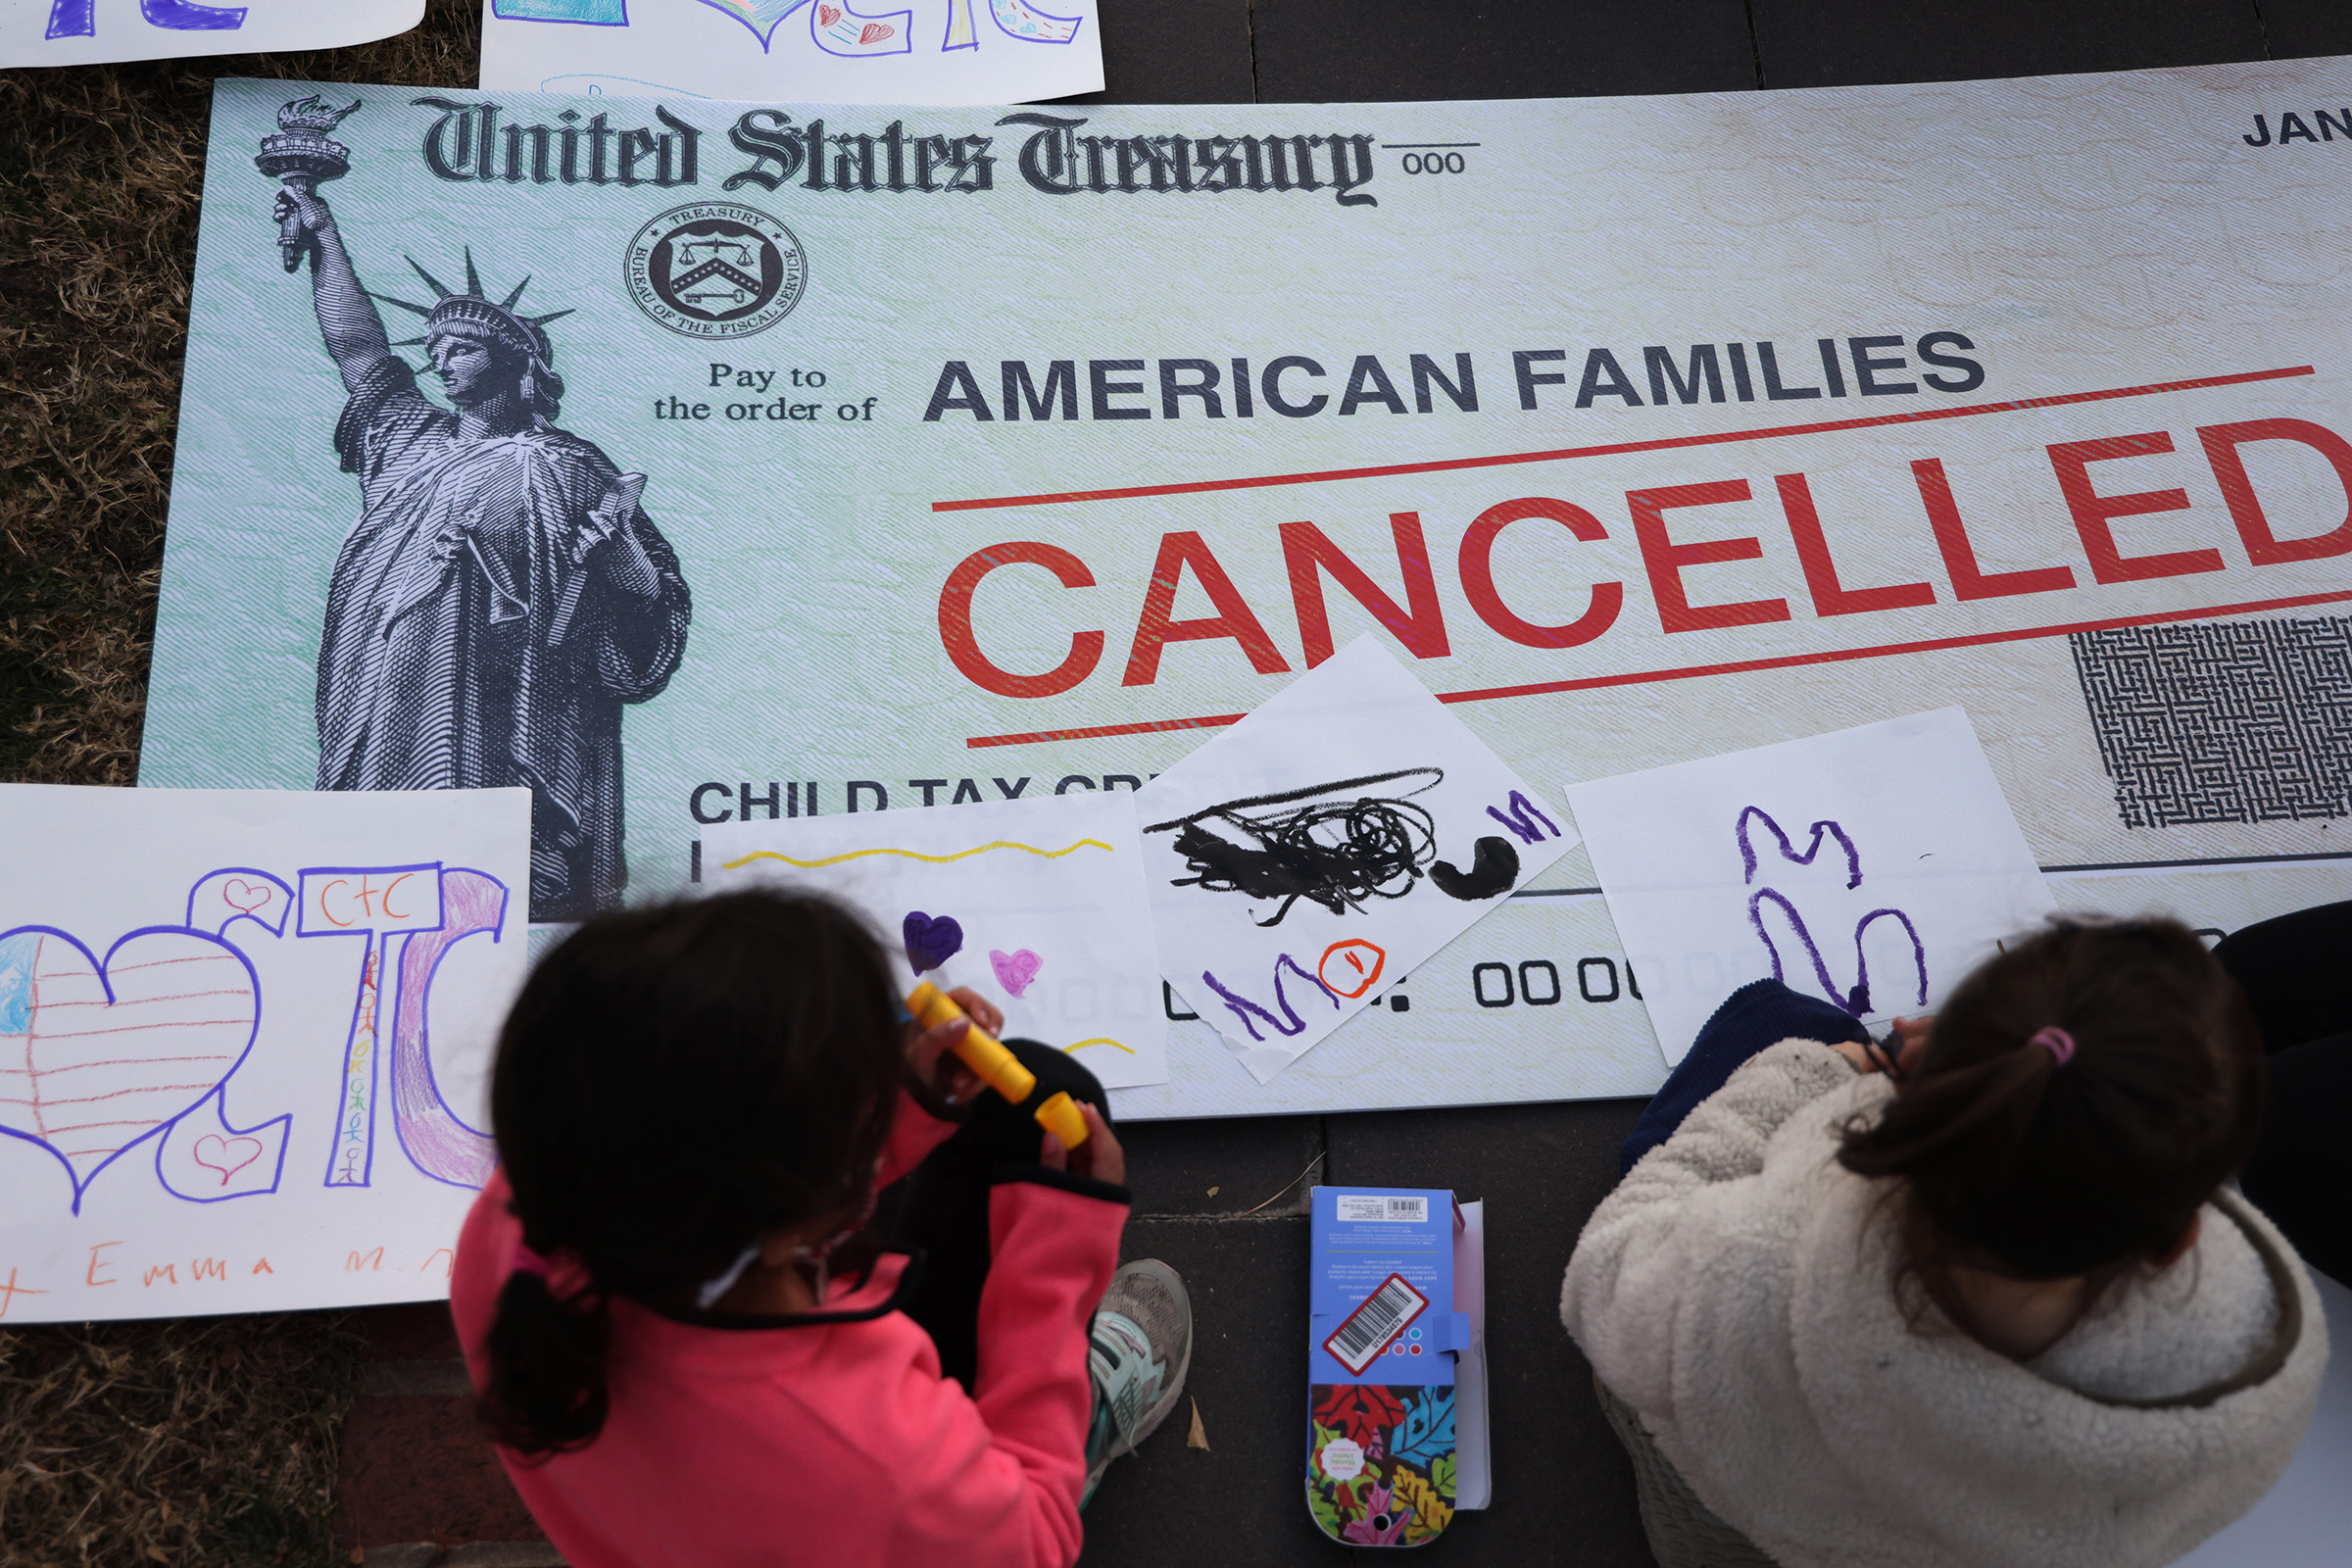 Children draw on top of a 'cancelled check' prop during a rally urging the passage of the Build Back Better legislation to extend the expanded Child Tax Credit, in front of the U.S. Capitol in Washington, D.C., on Dec. 13, 2021. (Alex Wong—Getty Images)